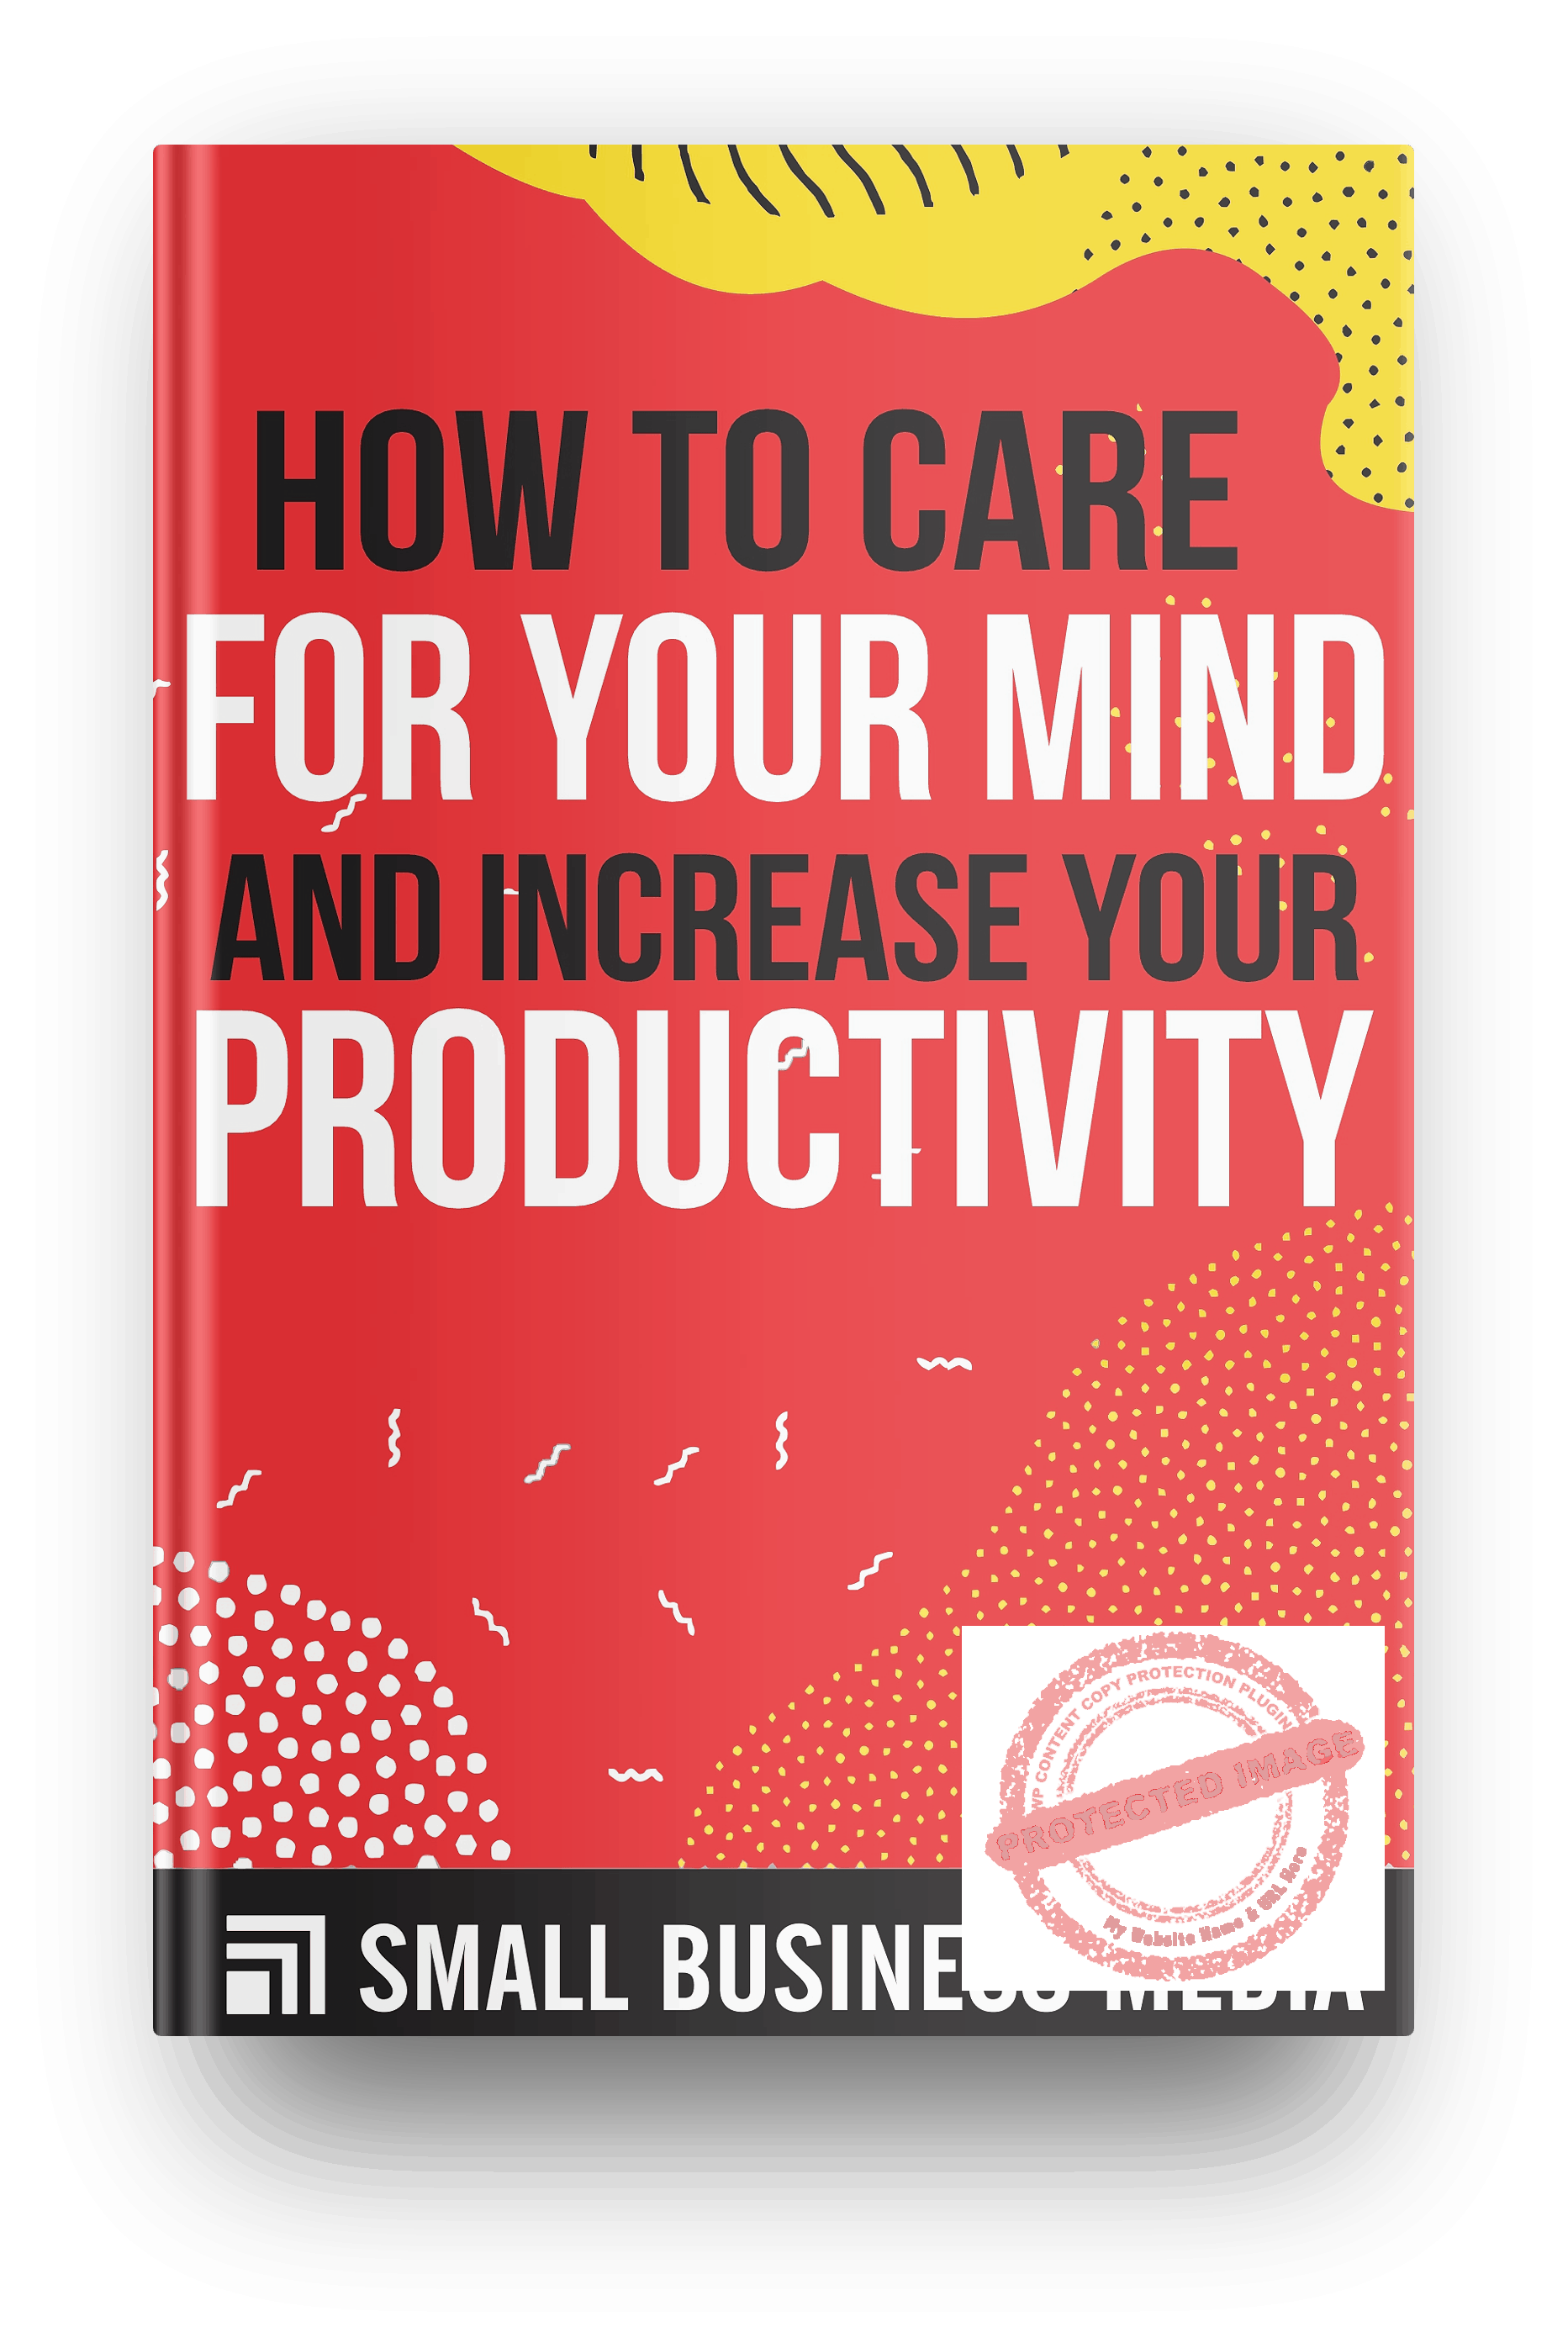 How to care for your mind and increase your productivity